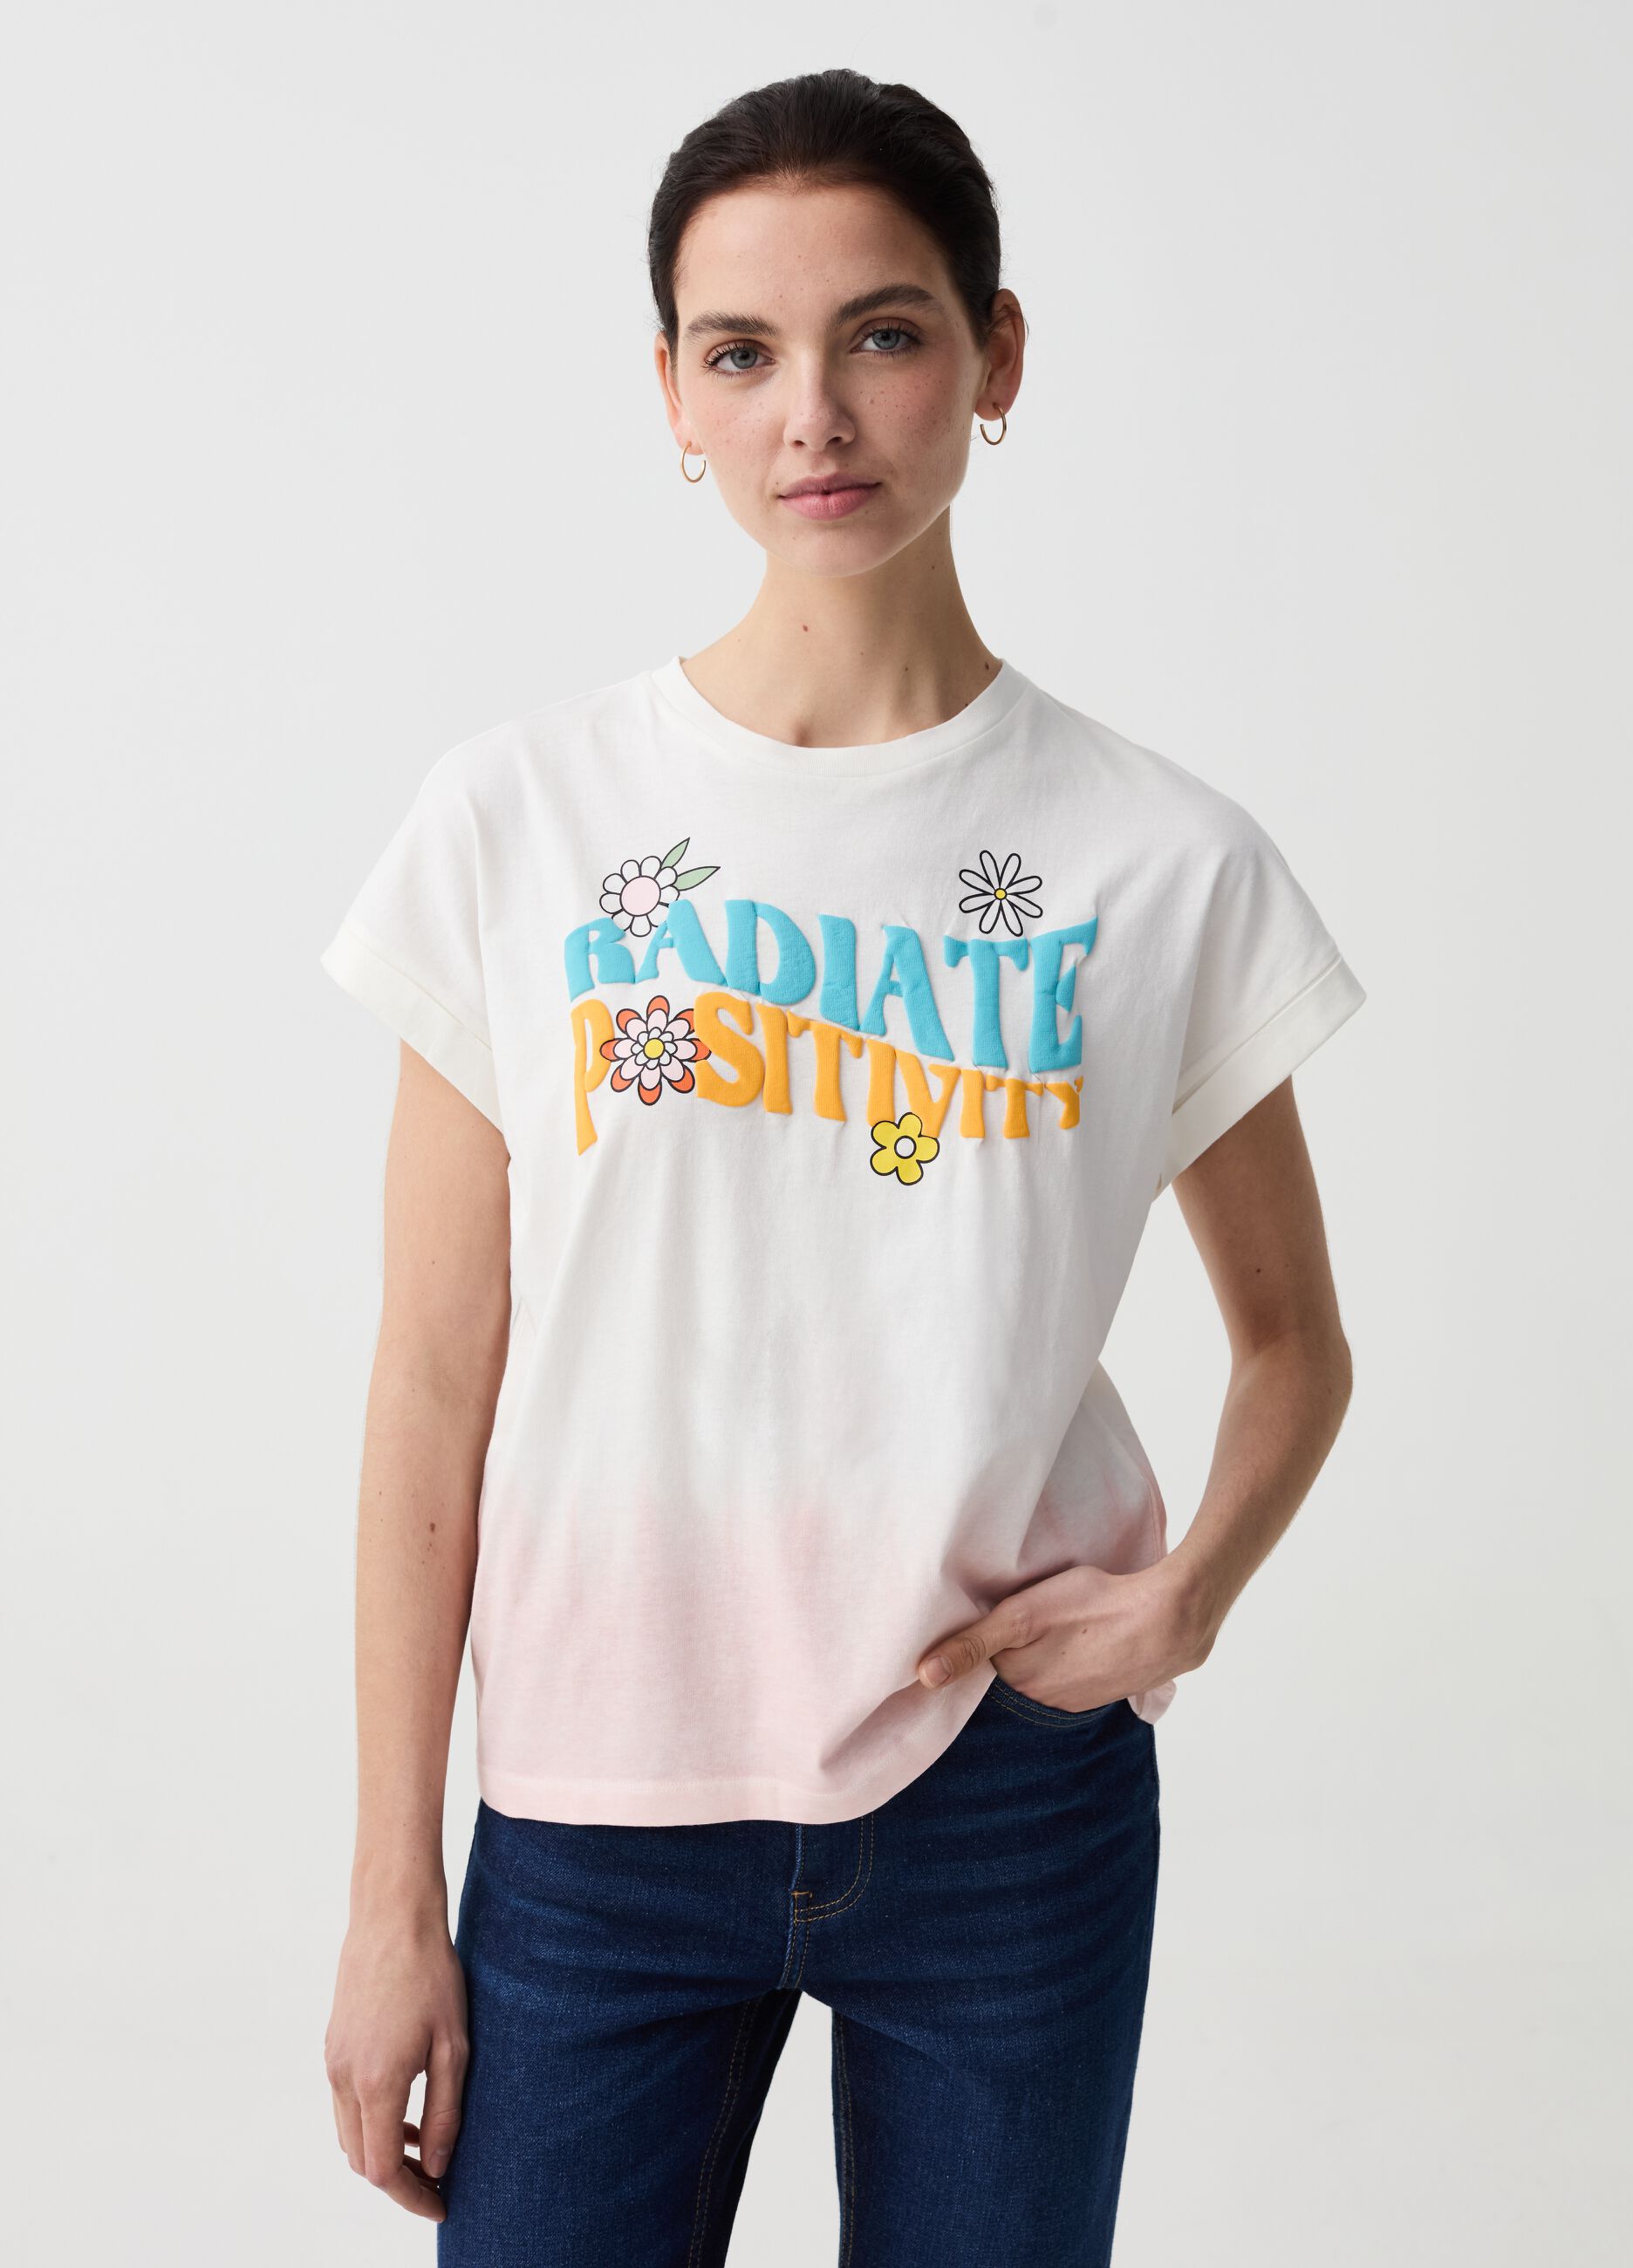 T-shirt with printed lettering and flowers